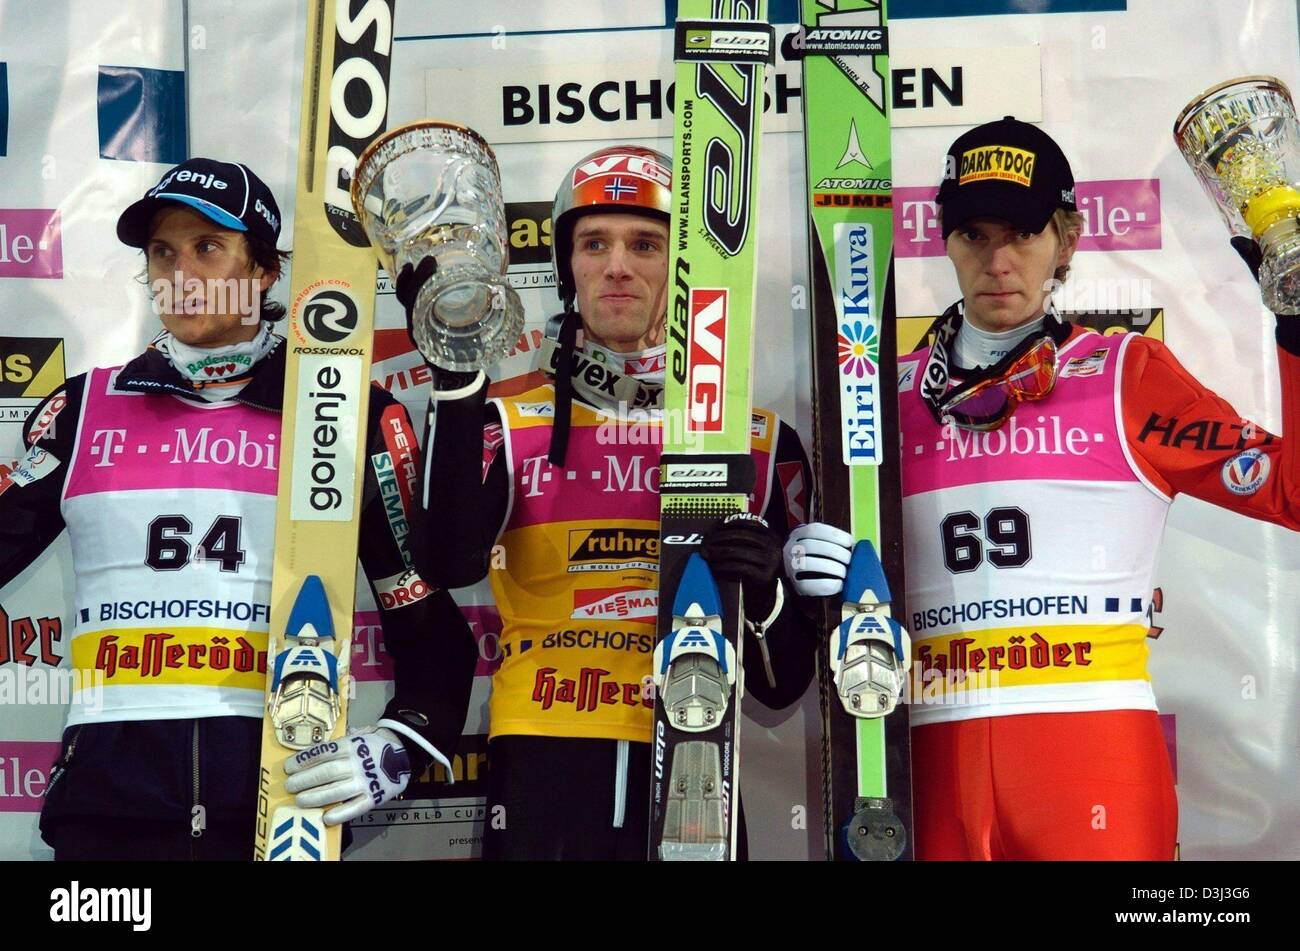 (dpa) - Norwegian ski jumper and overall winner Sigurd Pettersen (C) poses on the podium with second placed Peter Zonta from Slovenia (L) and third placed Janne Ahonen from Finland, after the last stage of the Four Hills tournament in Bischofshofen, Austria, 6 January 2004. Pettersen won the tournament with his third victory of the event, giving Norway their first overall title in  Stock Photo